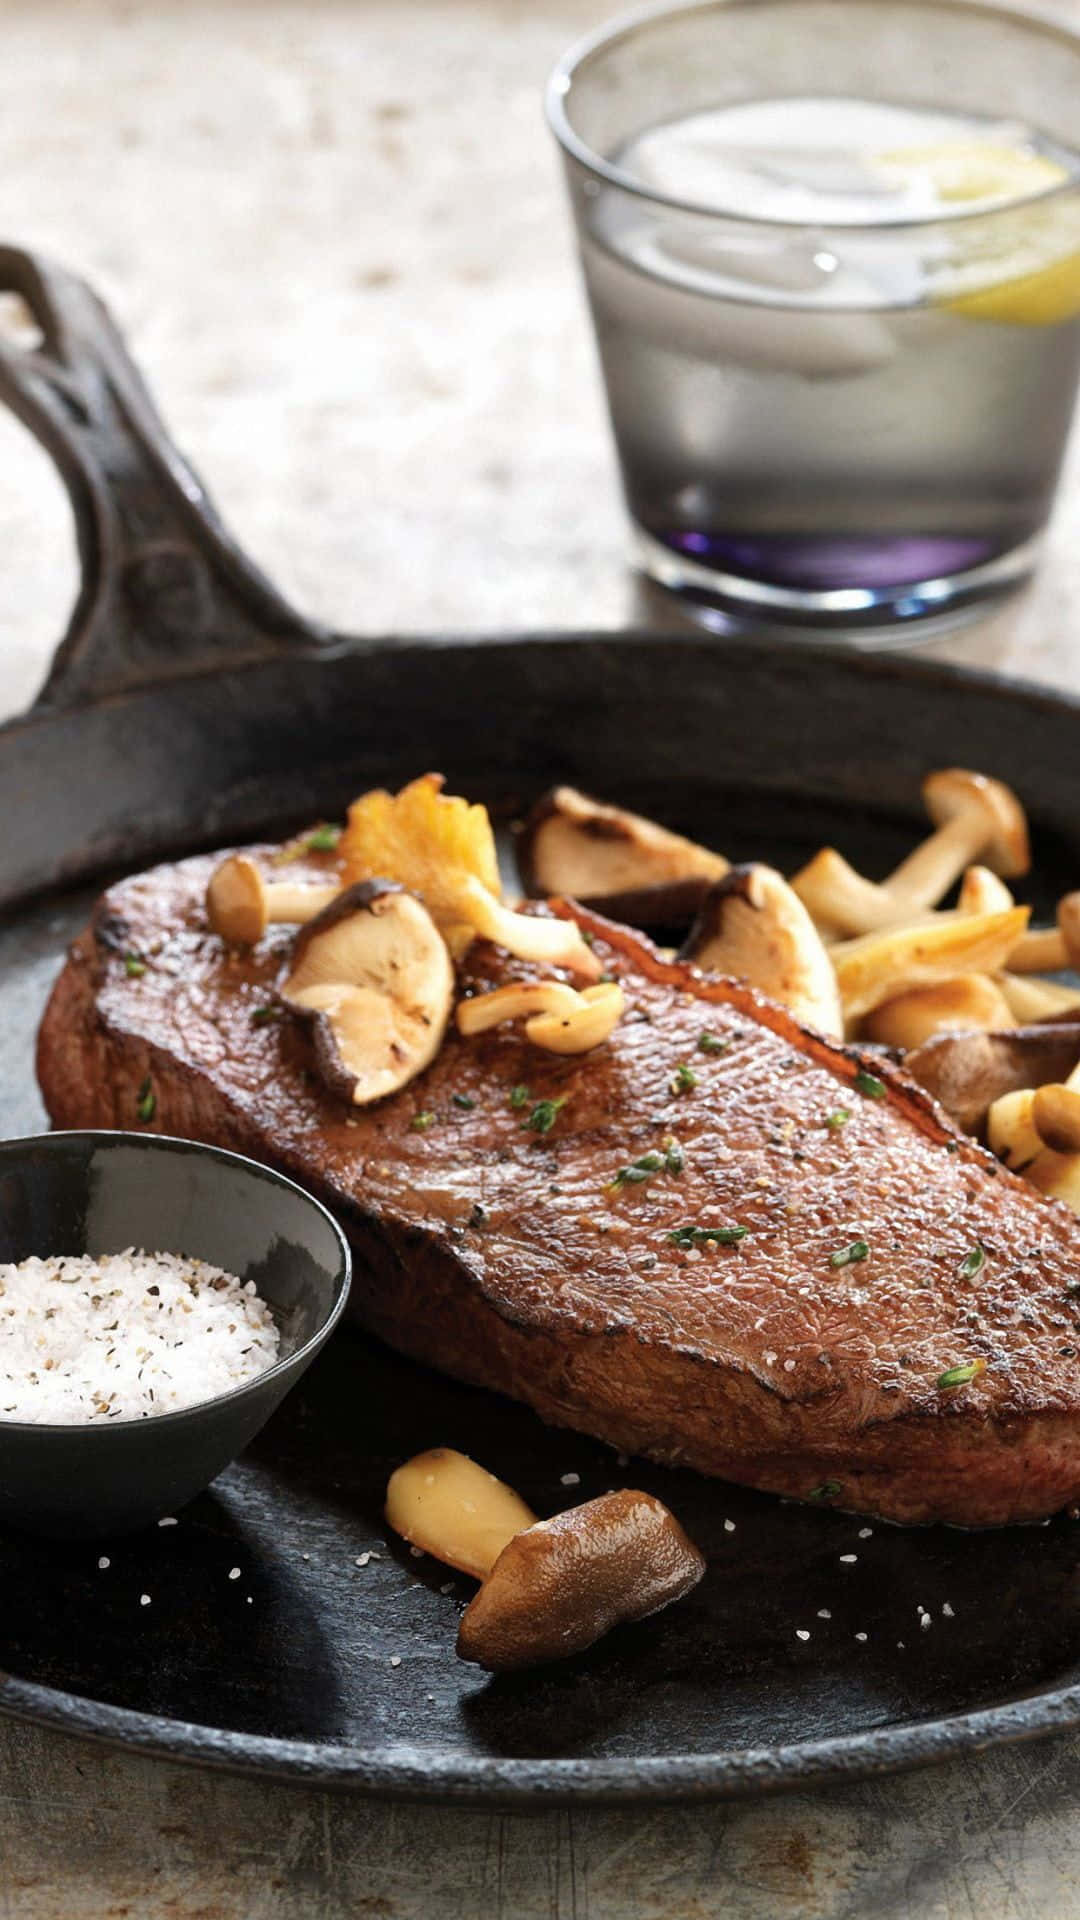 A Steak On A Skillet With Mushrooms And A Glass Of Wine